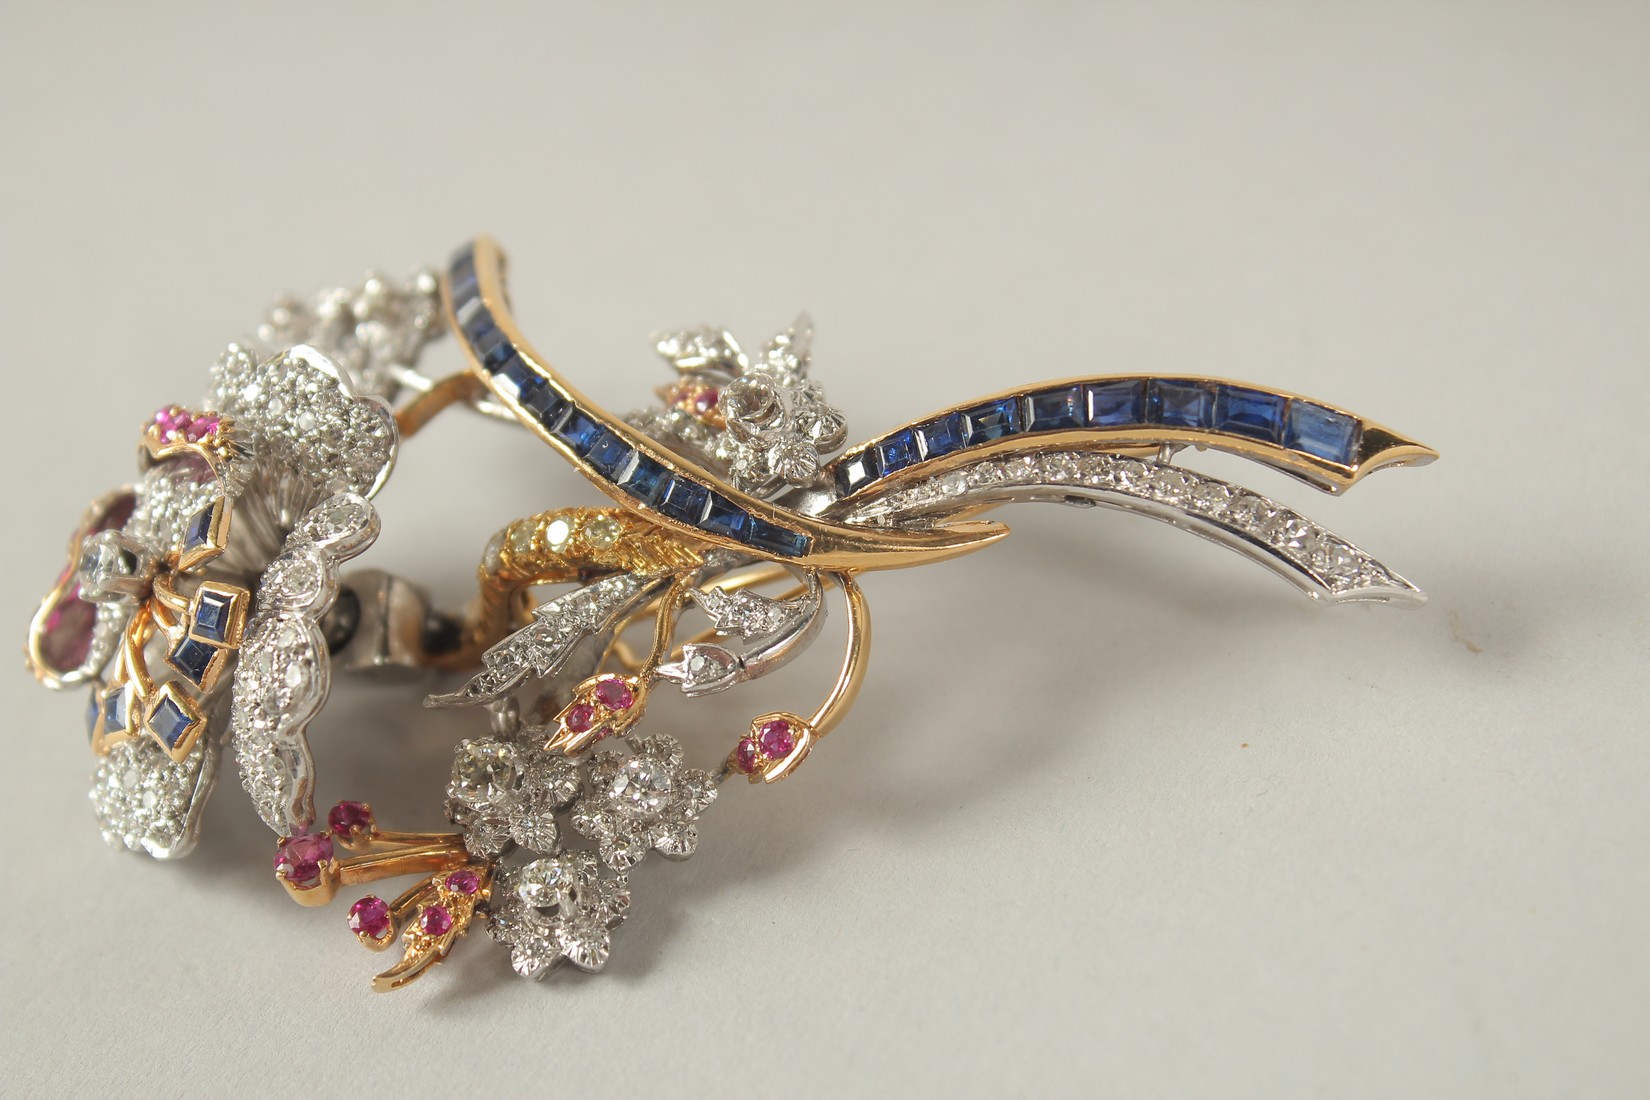 A SUPERB 18CT GOLD, DIAMOND, RUBY AND SAPPHIRE TREMBLING FLOWER BROOCH. 35grams. - Image 3 of 5